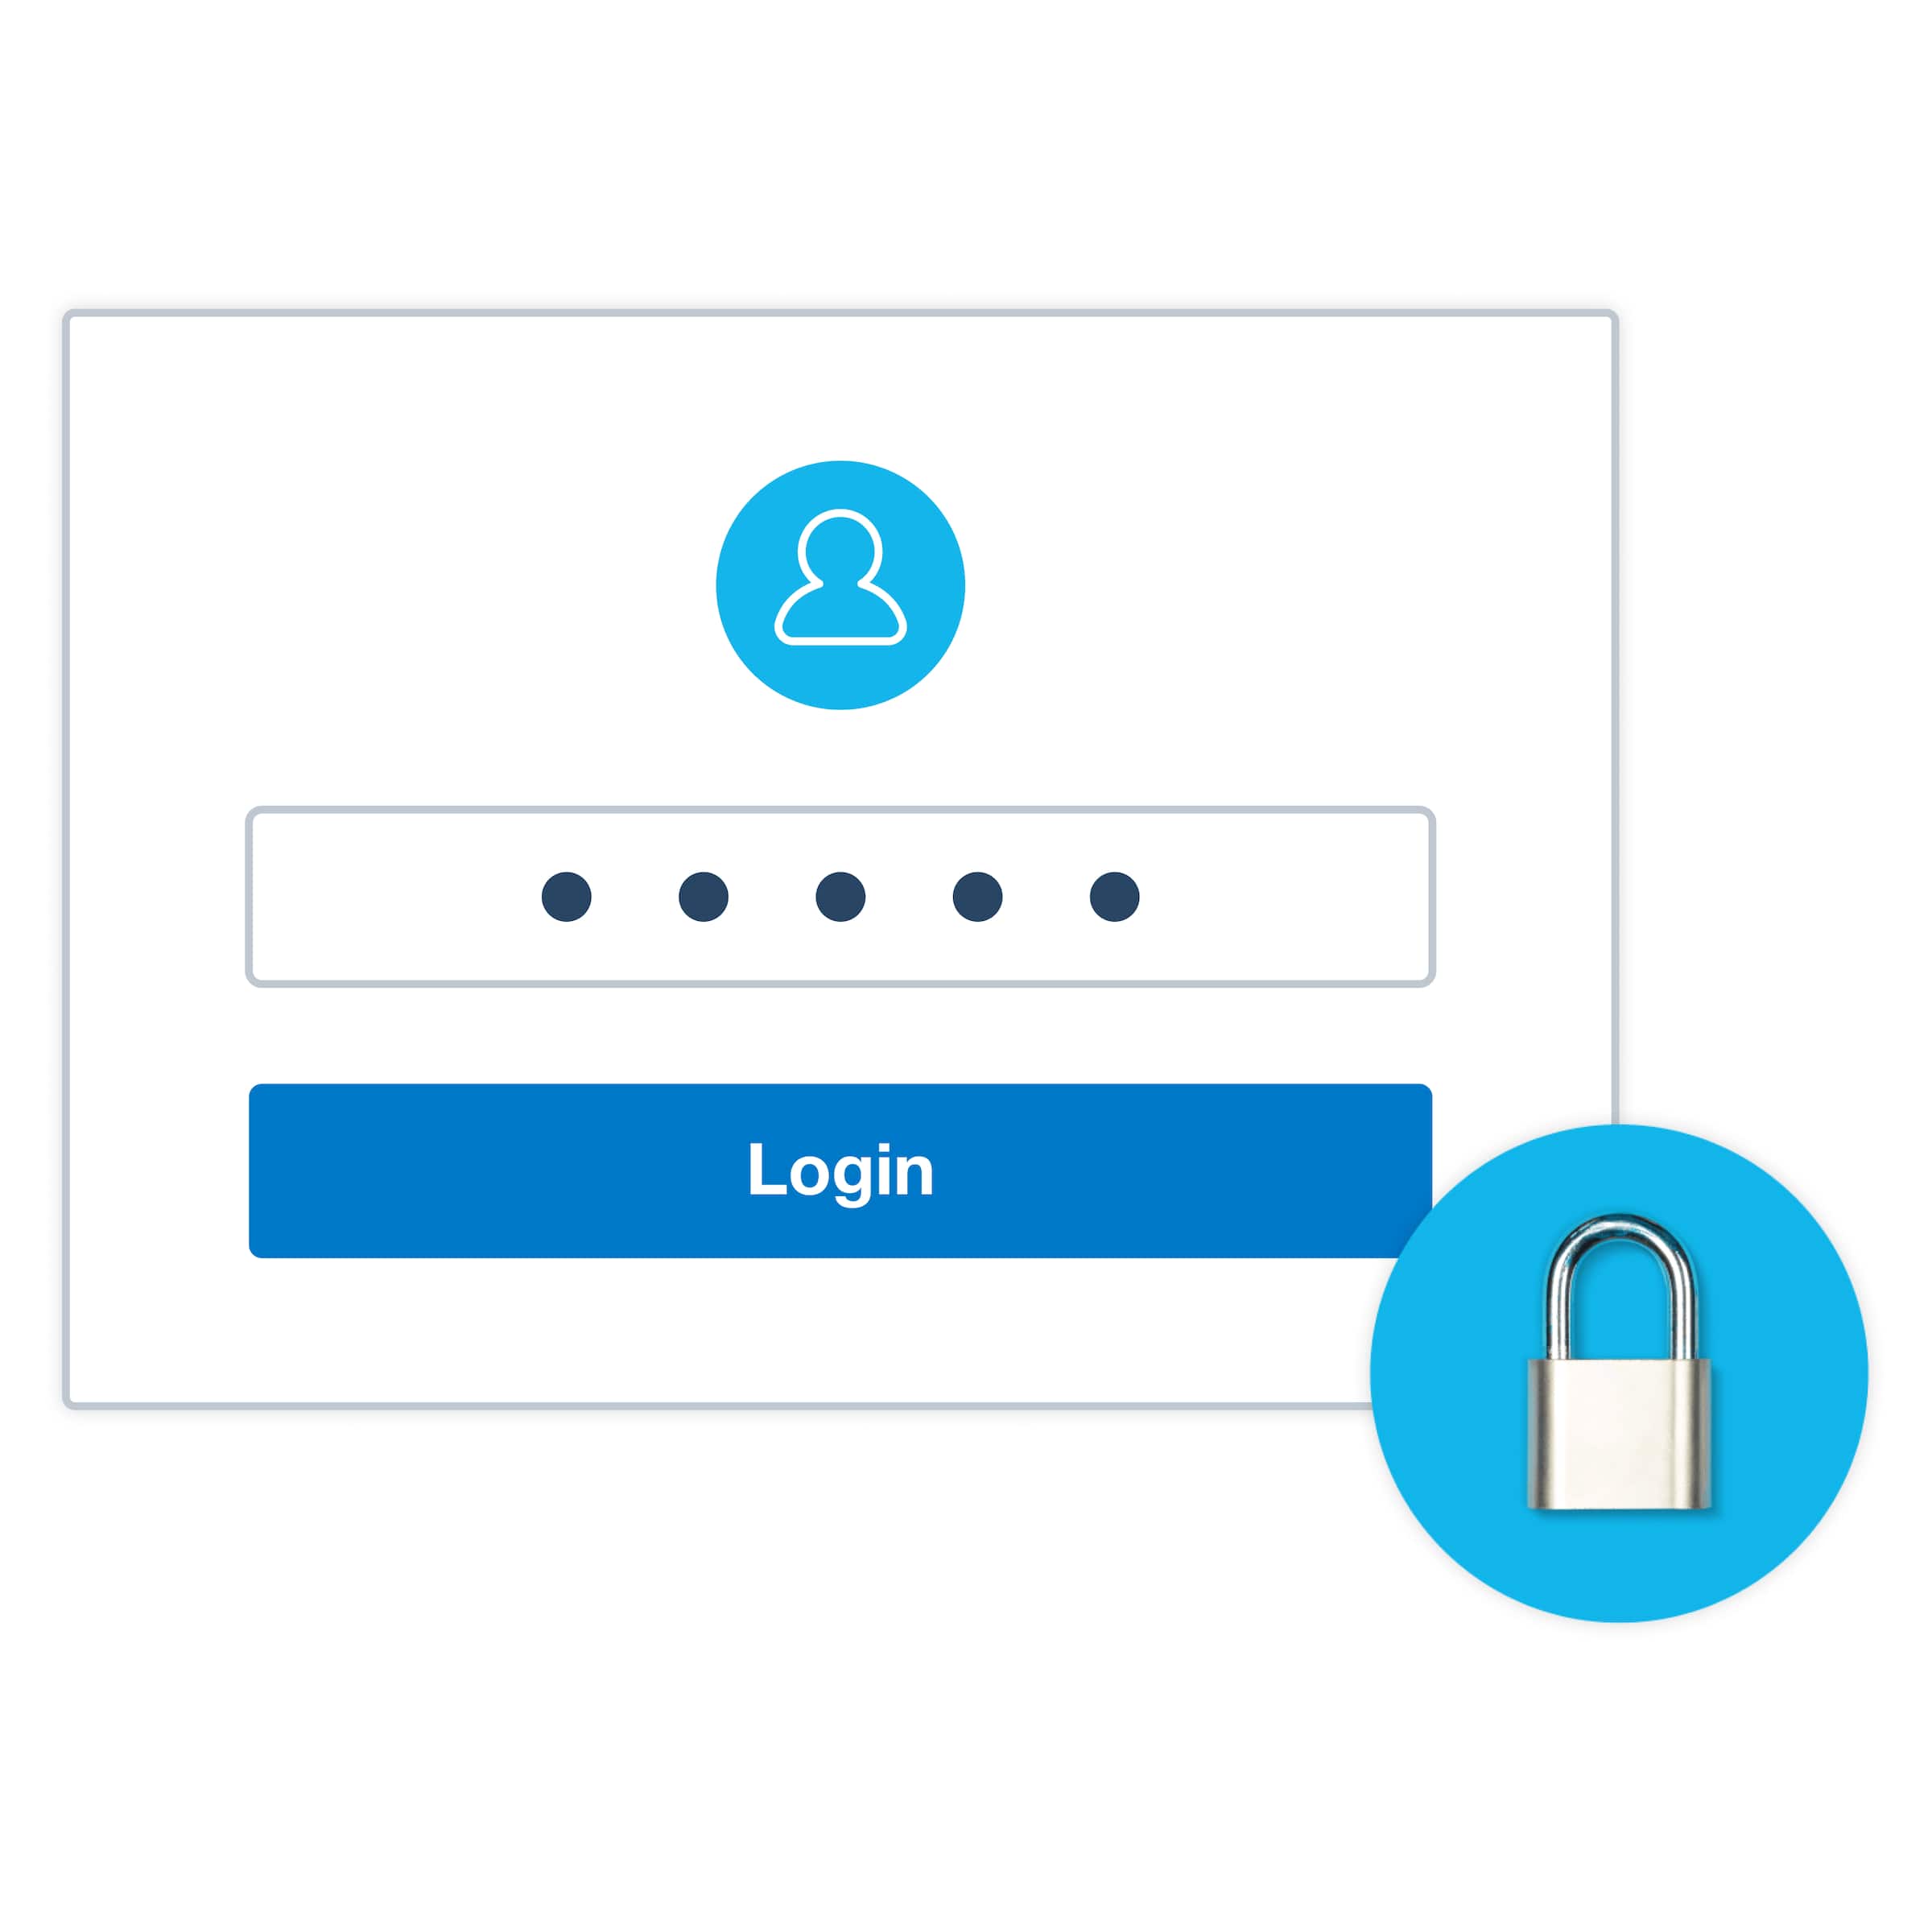 A login screen and a padlock represent how MFA prevents anyone but you from accessing your Xero account.